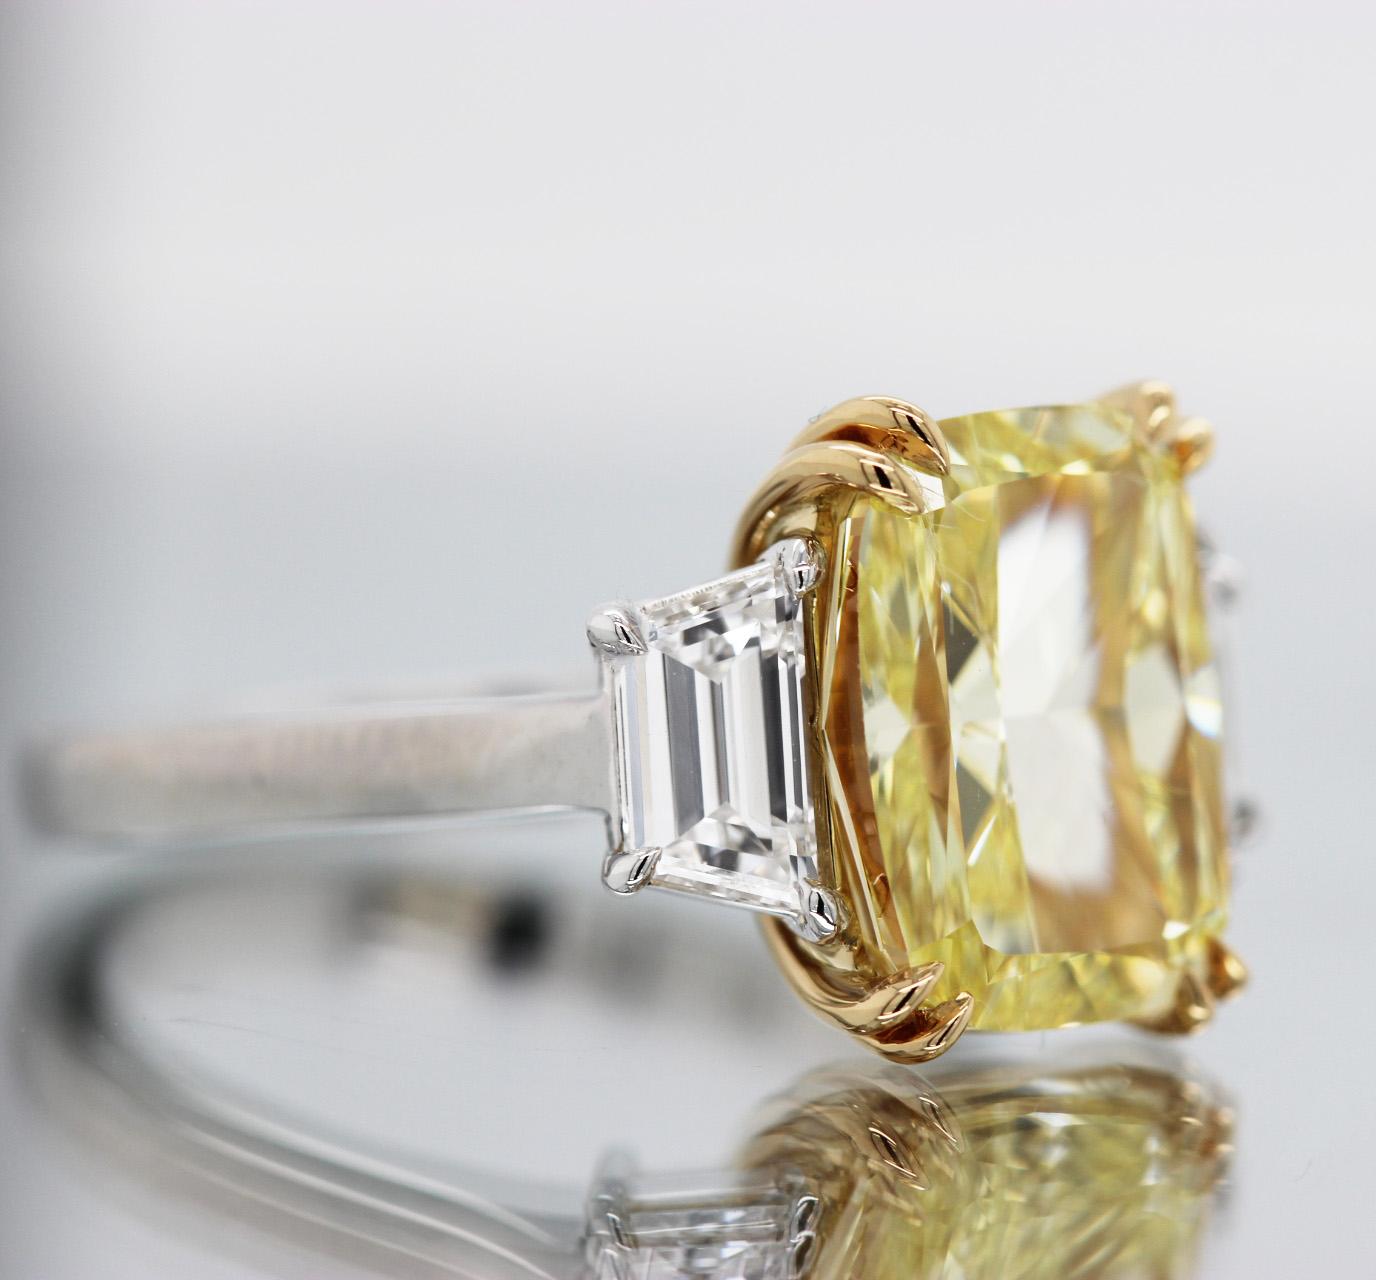 GIA certified 5+ carat fancy intense yellow cushion cut diamond ring from Scarselli. Three-stone engagement ring featuring natural, fancy intense yellow cushion cut diamond center stone on 18k yellow gold and platinum setting.

Bold yet classic,